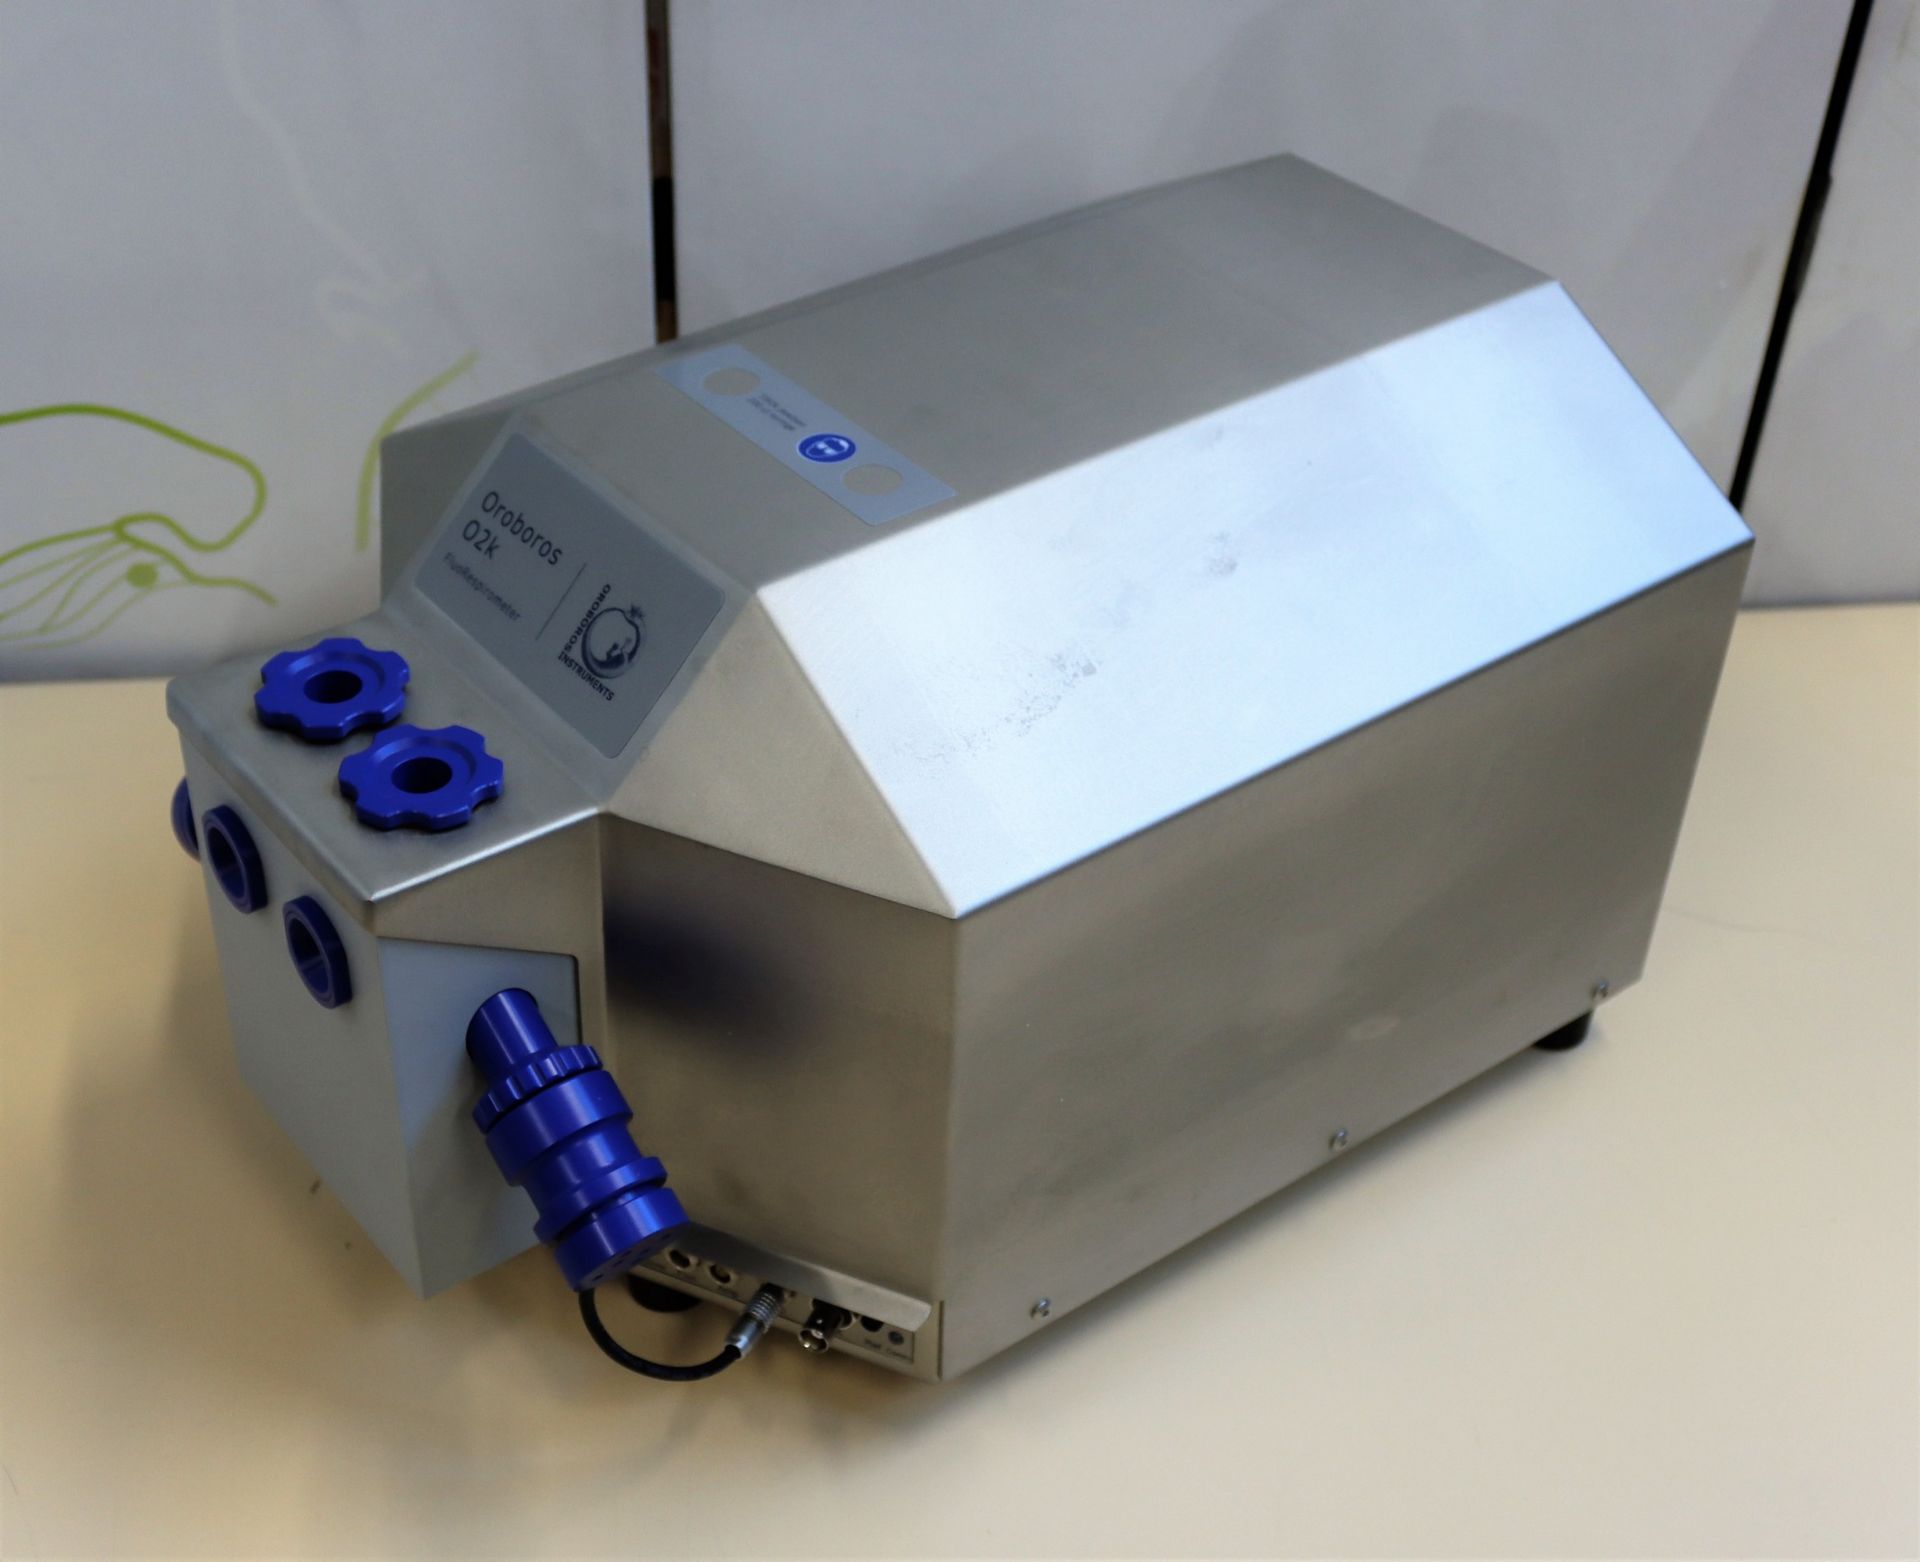 A pre-owned Oroboros O2k-FluoRespirometer (Unit only, no accessories included. Untested, sold as